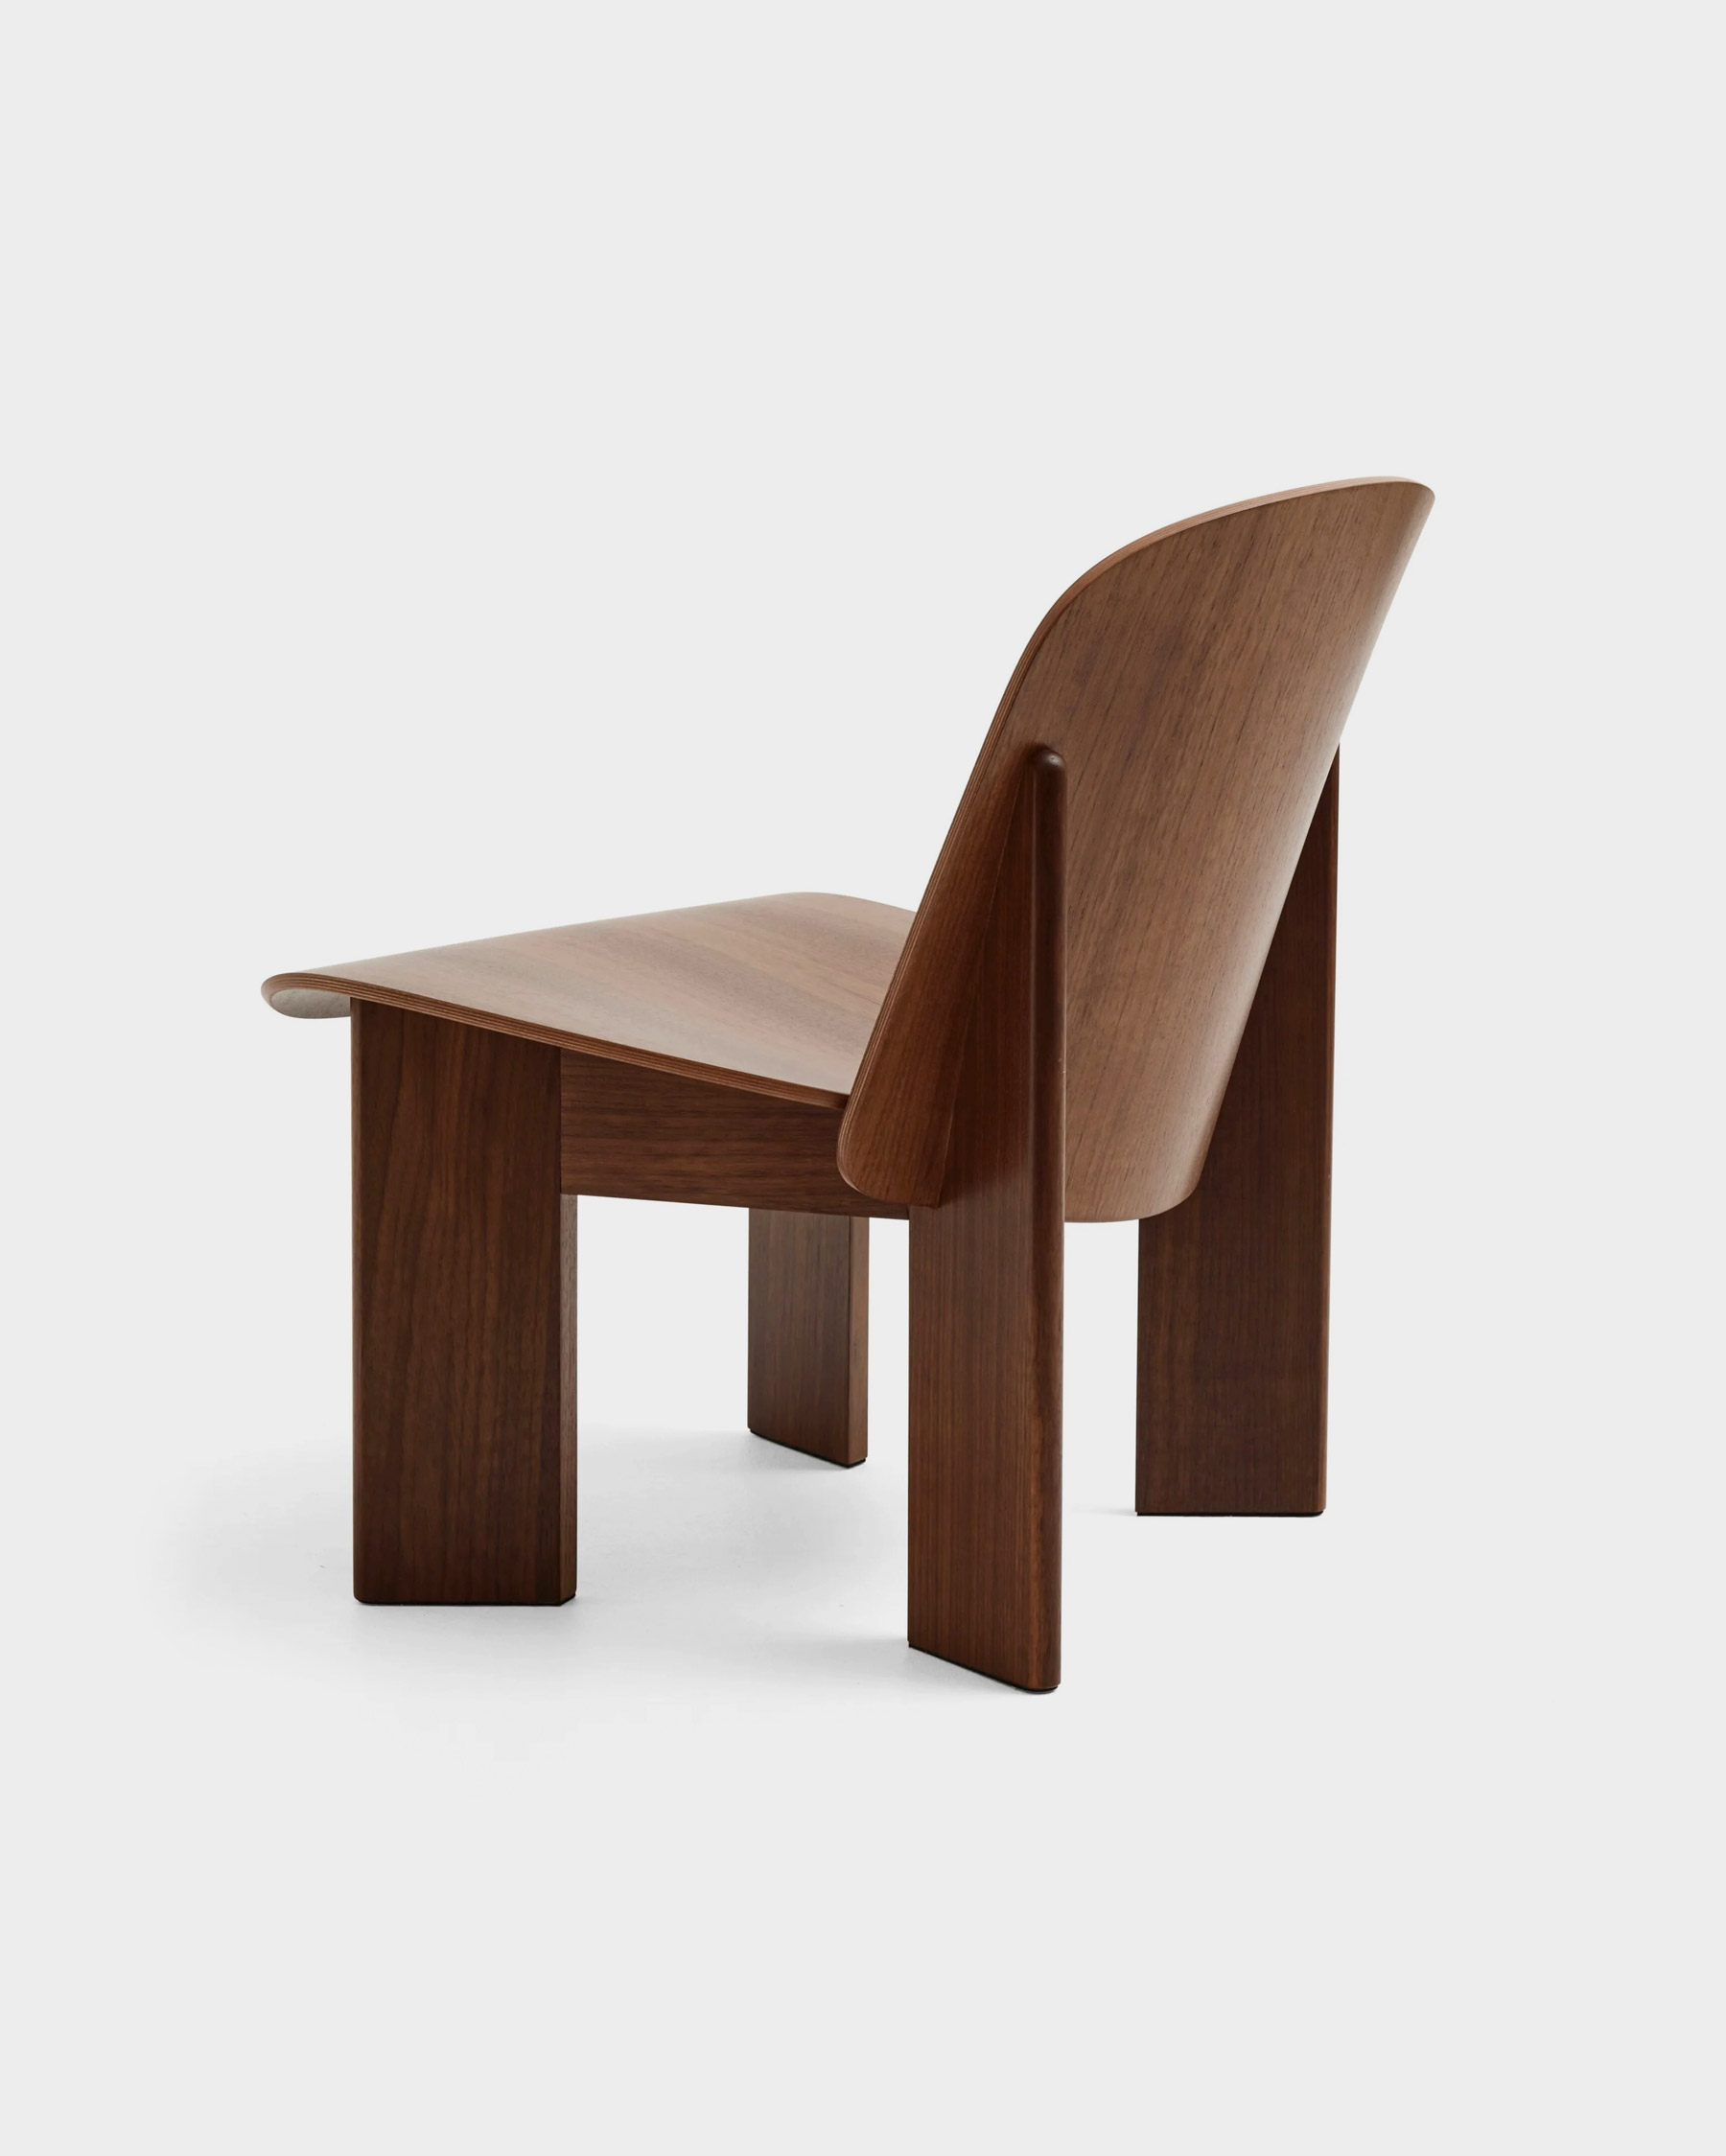 Chisel Lounge Chair designed by Andreas Bergsaker for HAY